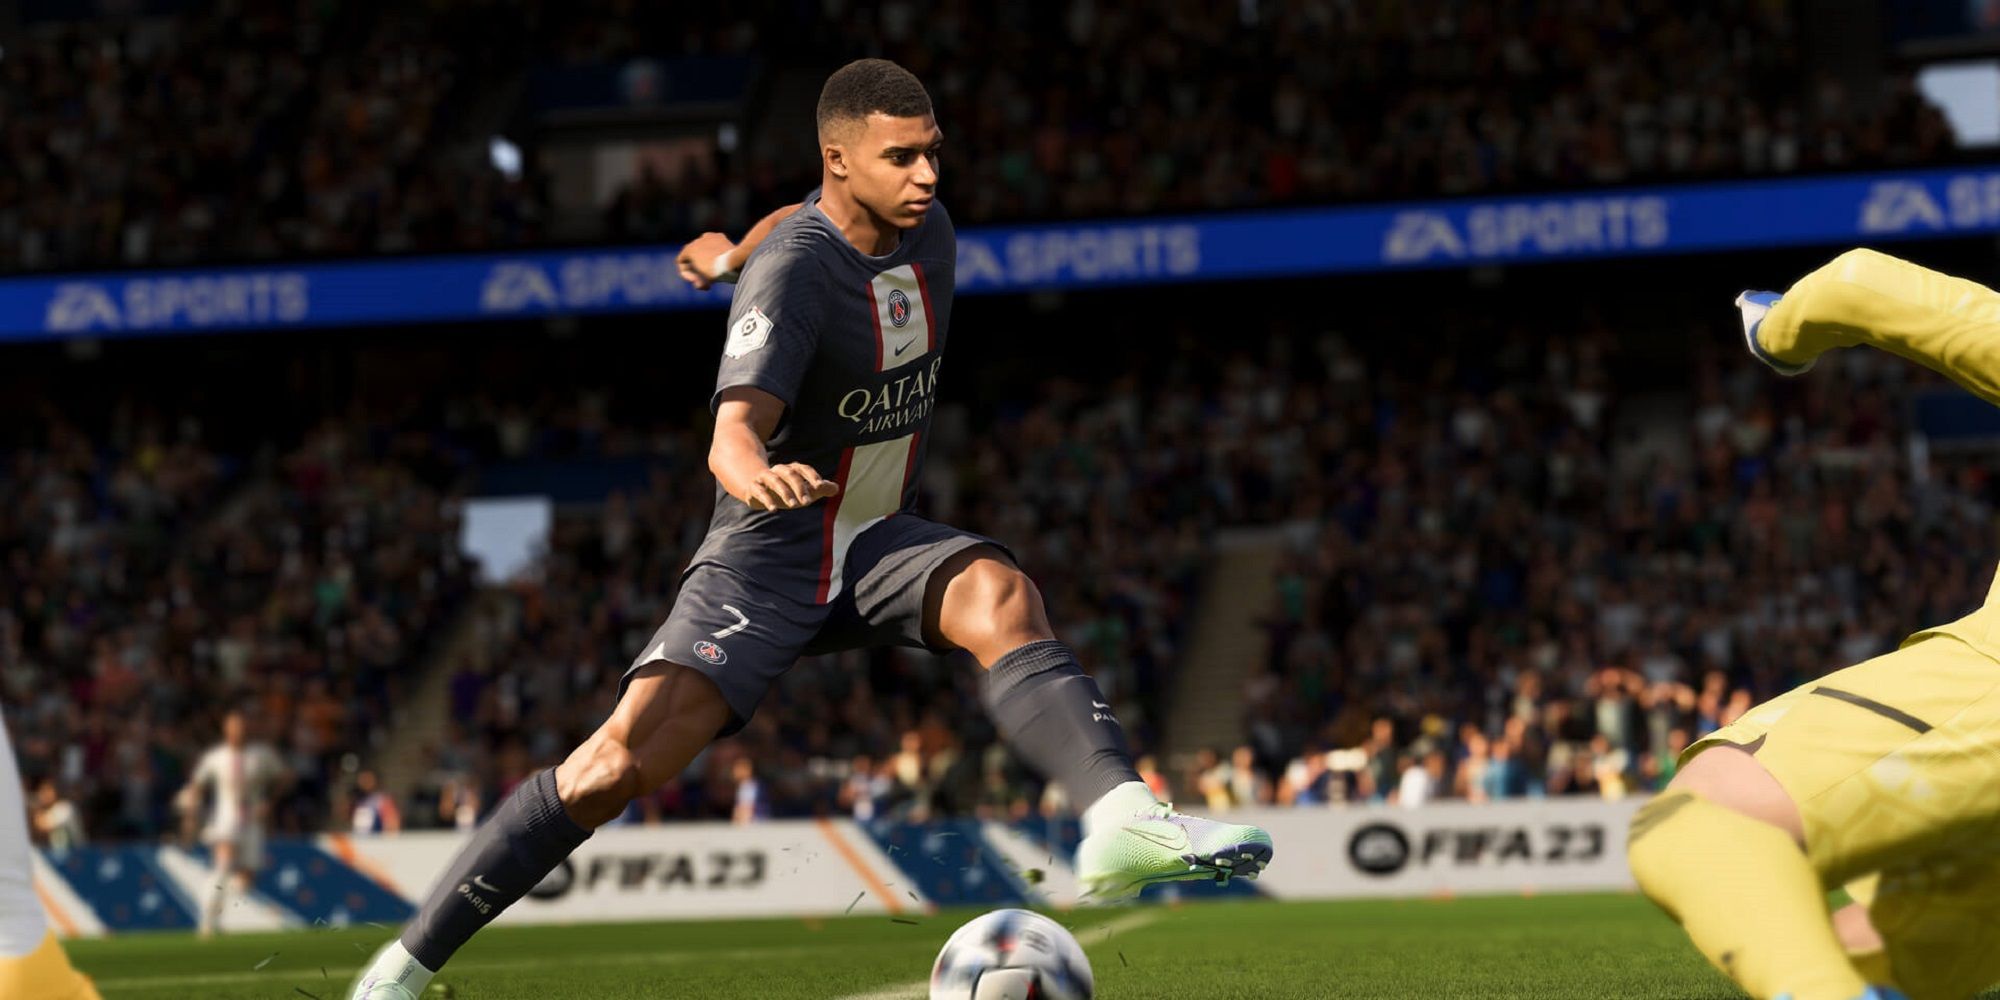 Mbappe in FIFA 23